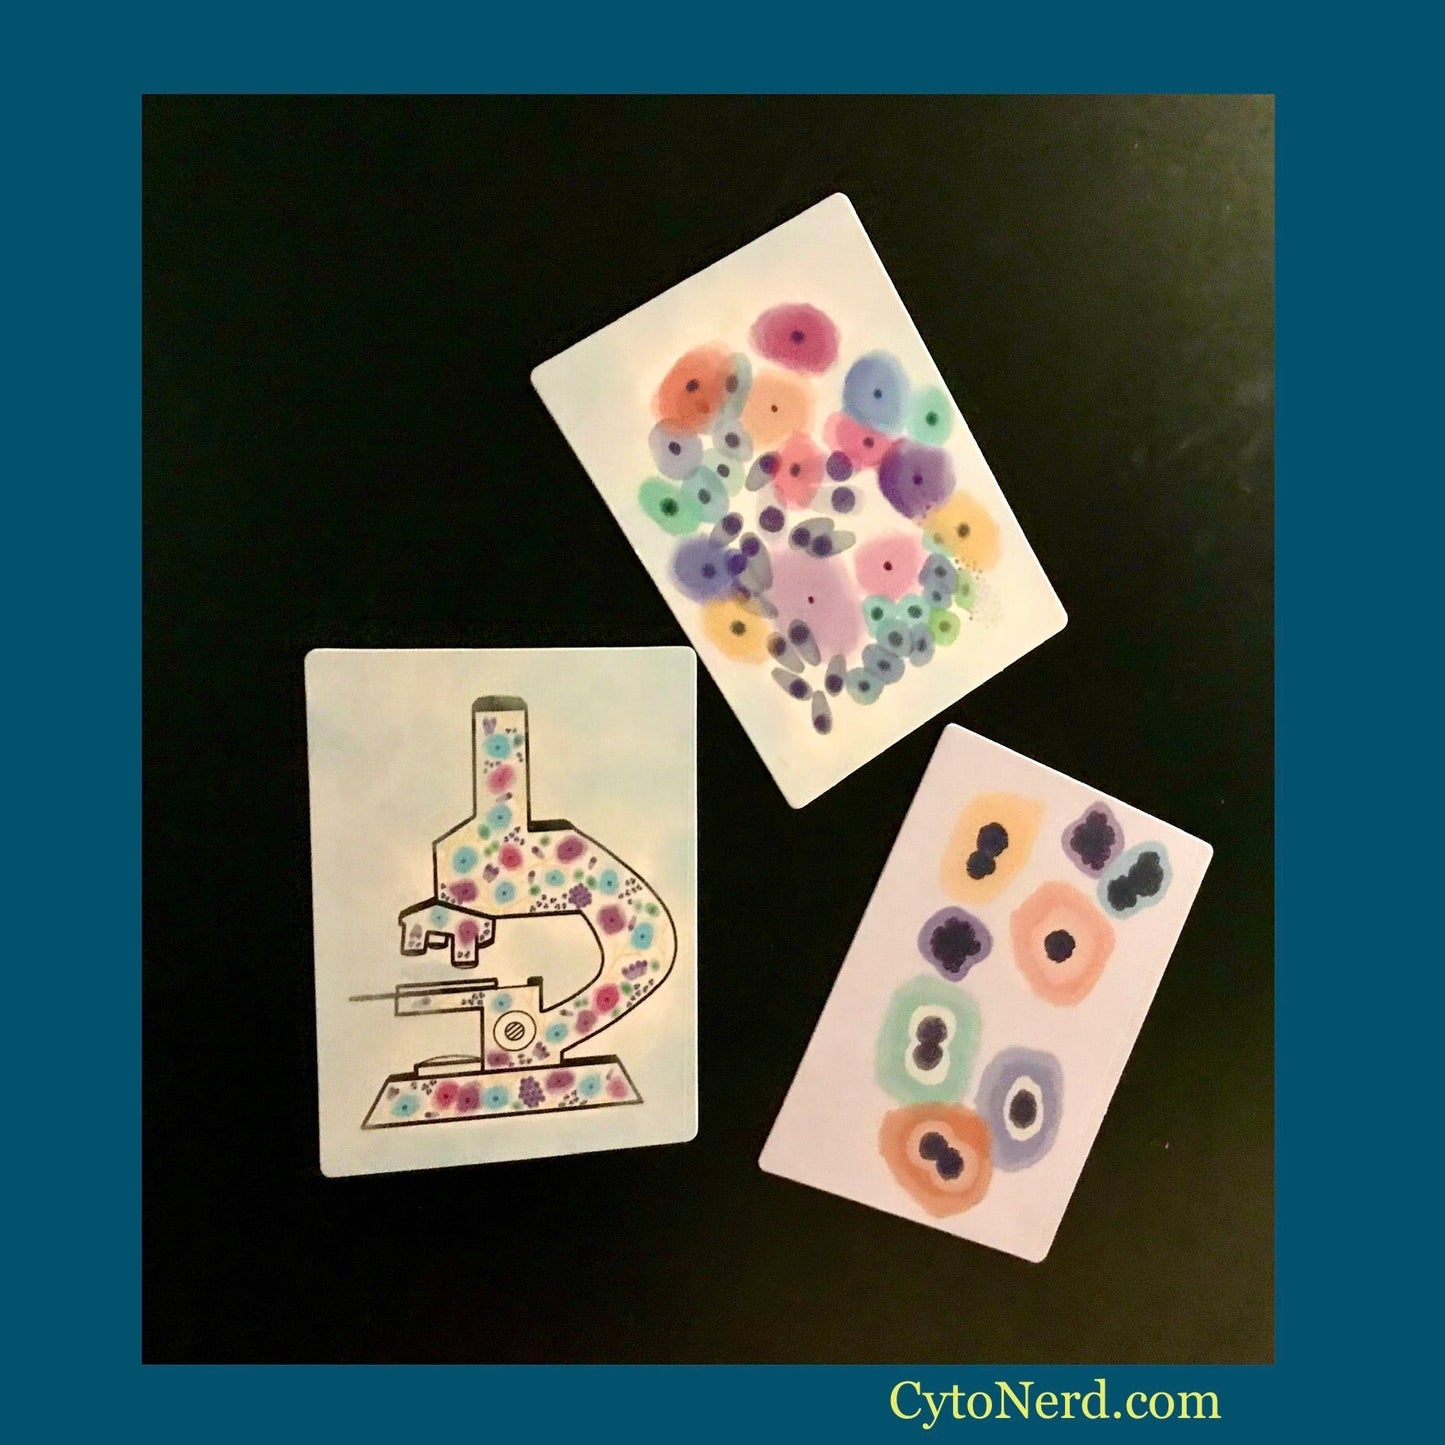 Fridge Magnets - of cells with dysplasia from the cervix